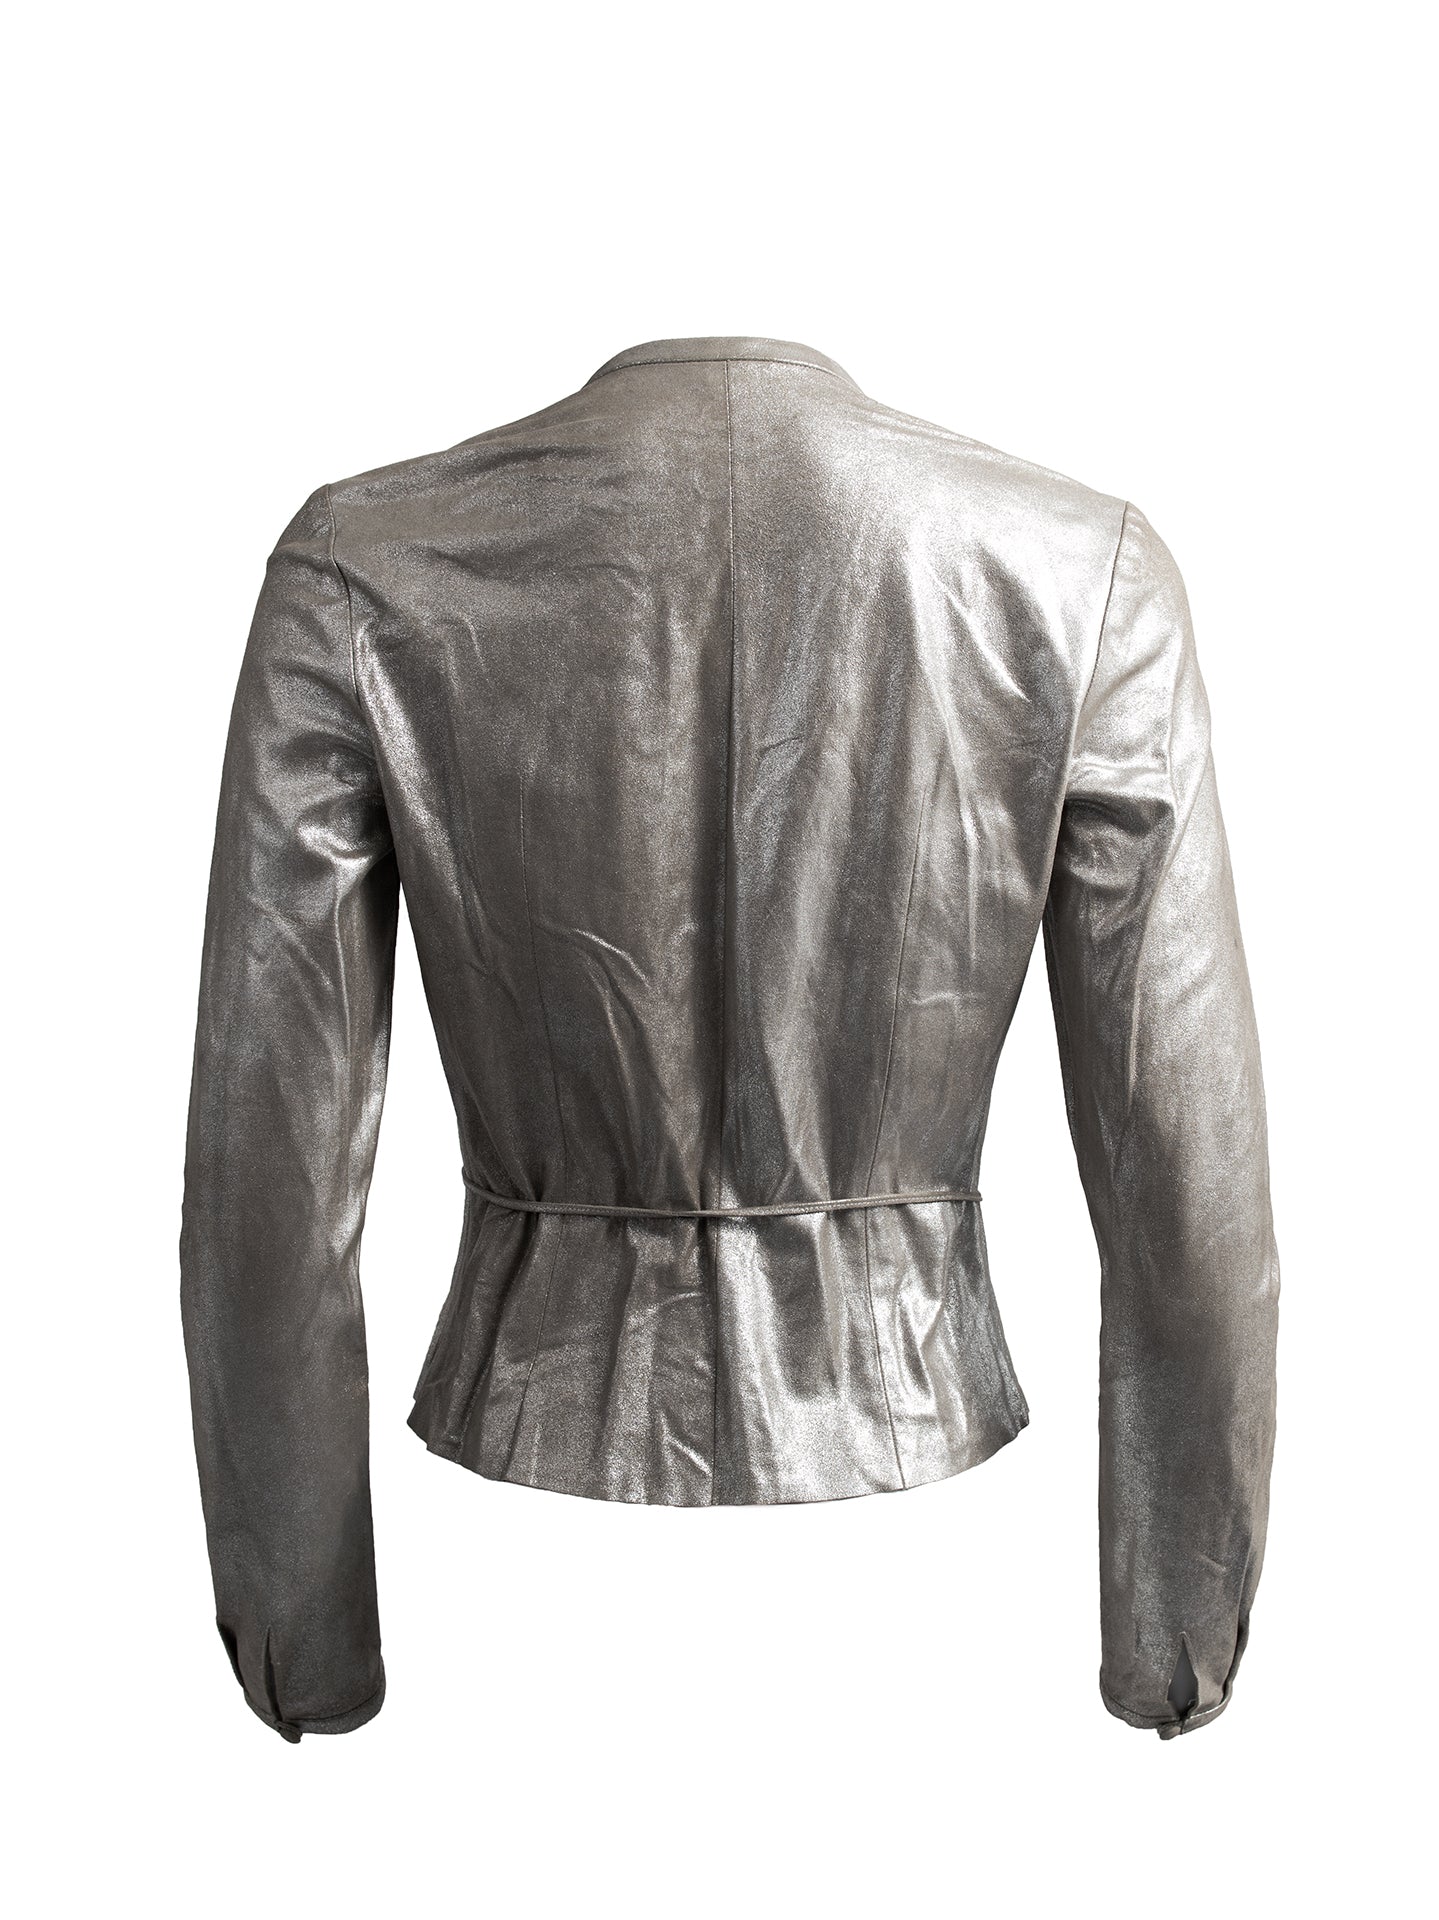 STONE GREY SUEDE FOILED JACKET